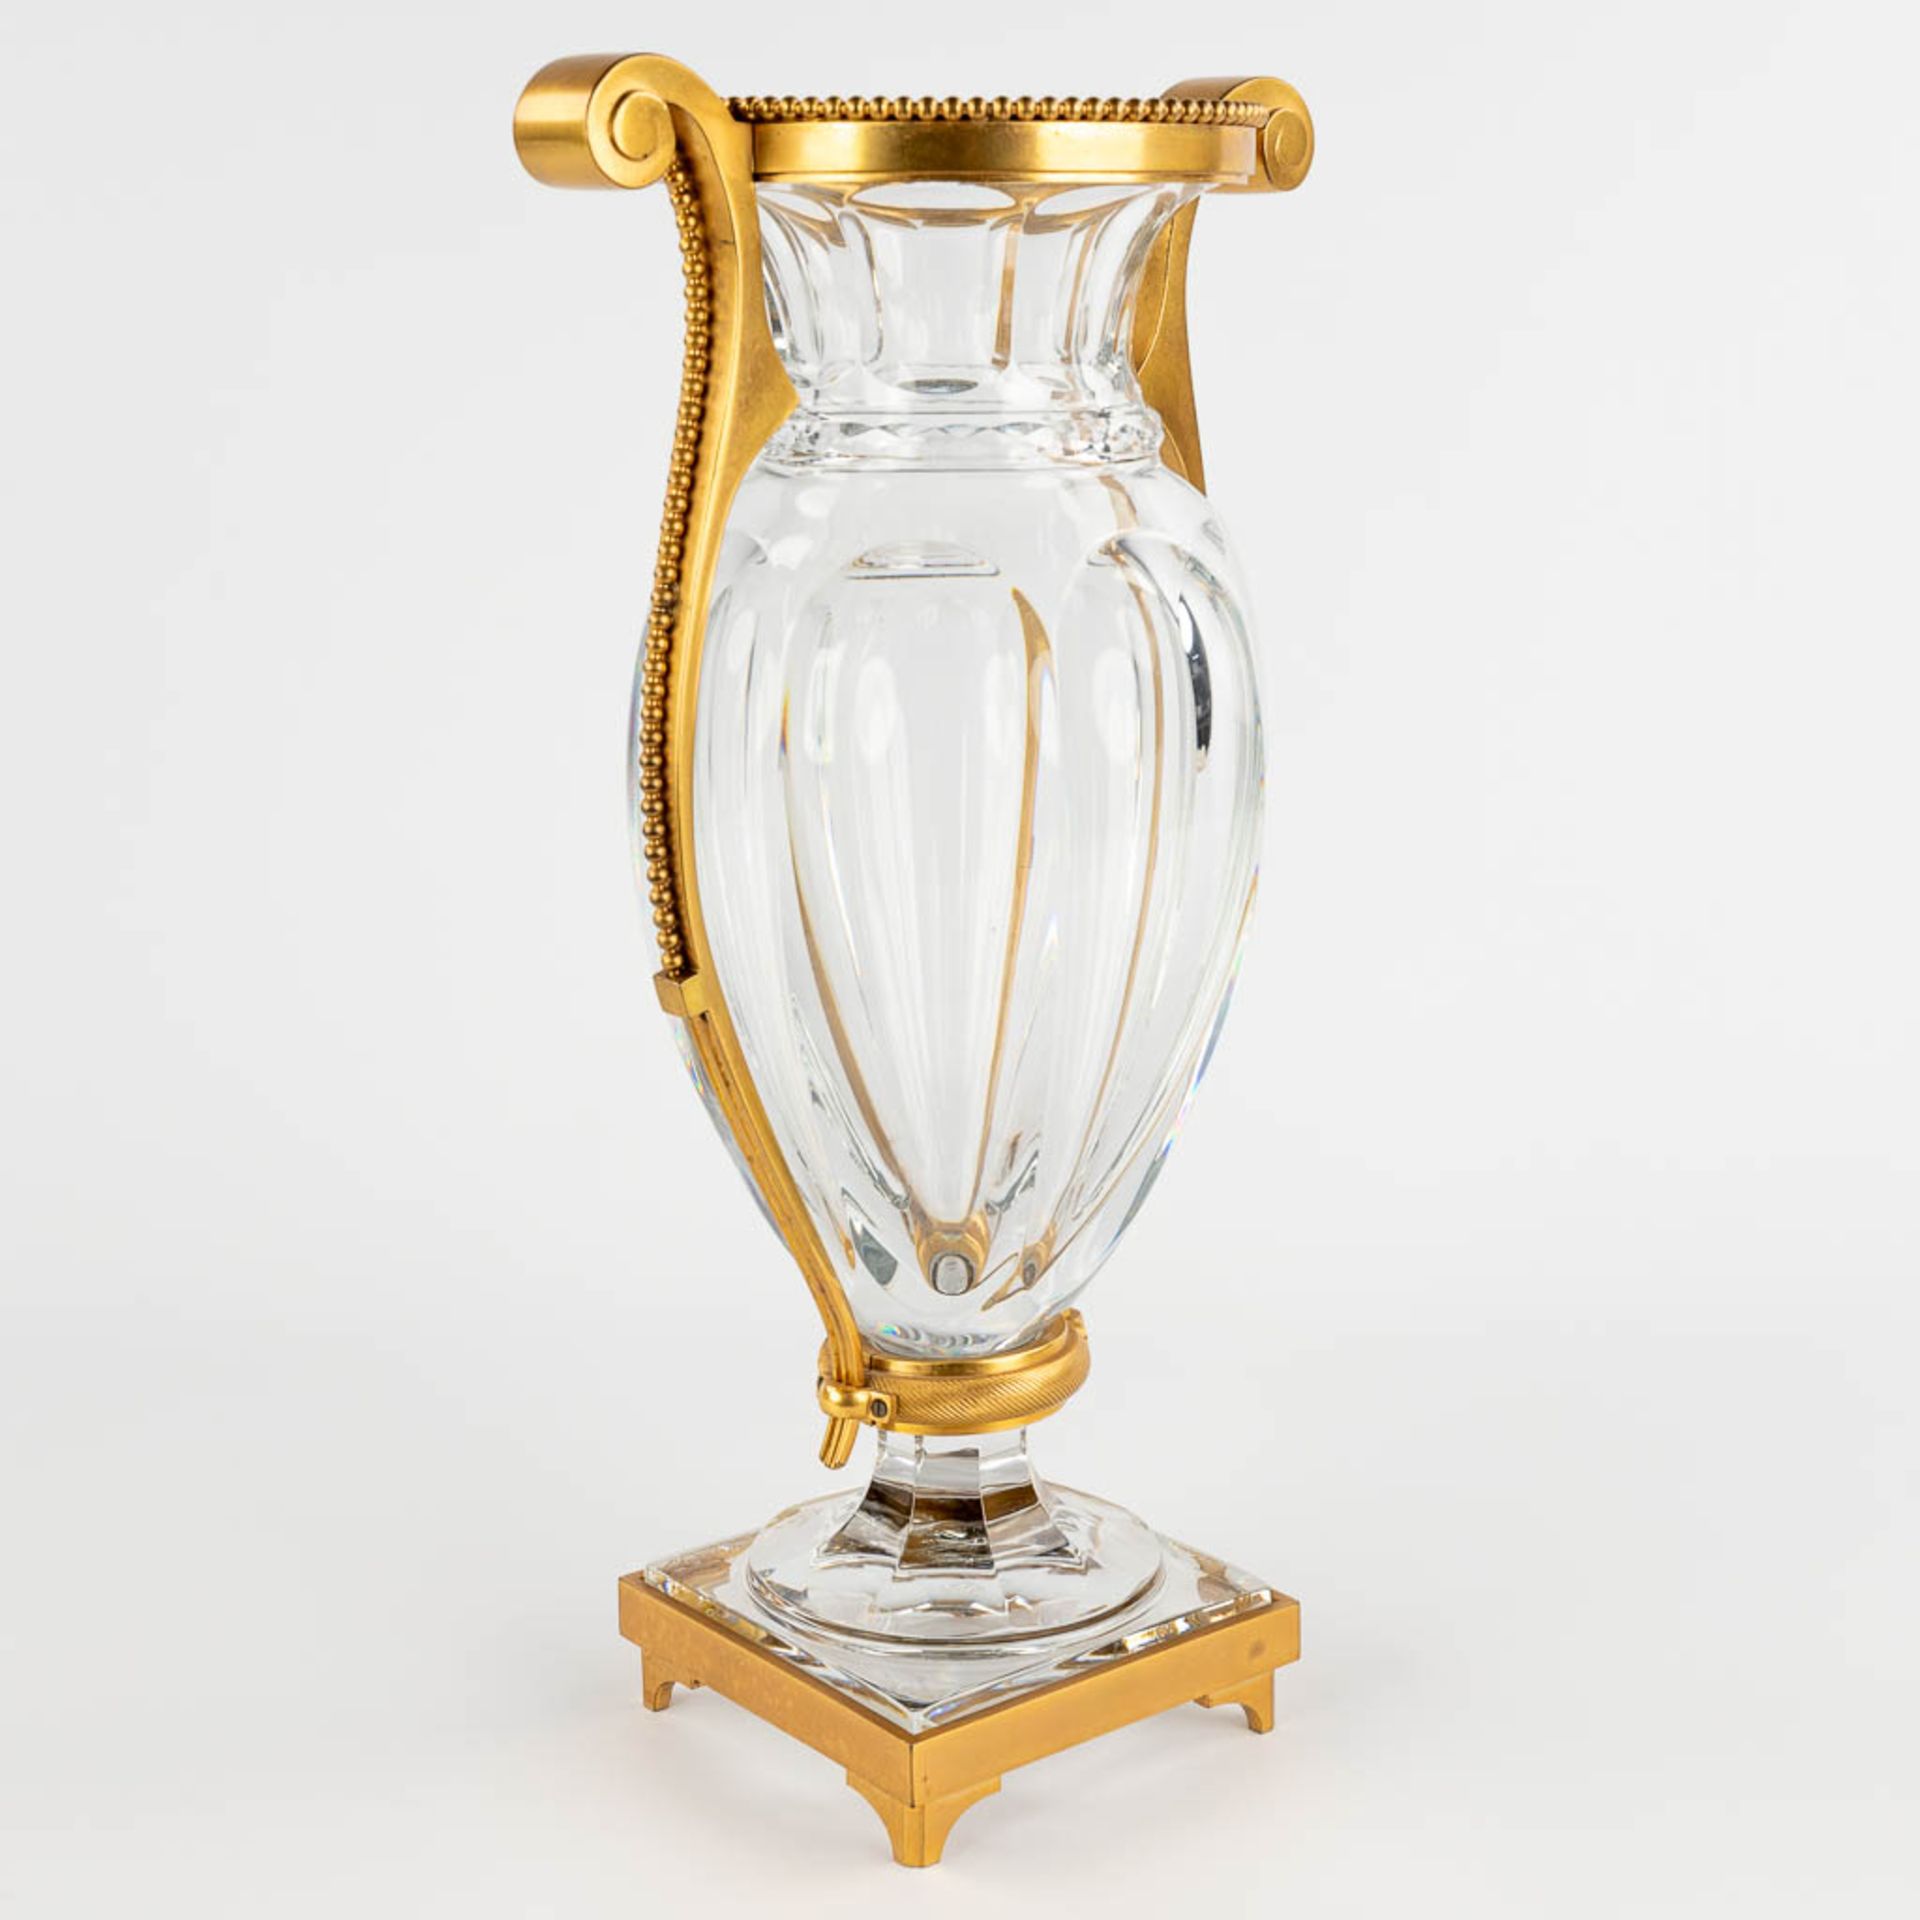 Baccarat, a large crystal vase mounted with gilt bronze. 20th C. (D:14 x W:22 x H:38,5 cm) - Image 3 of 12